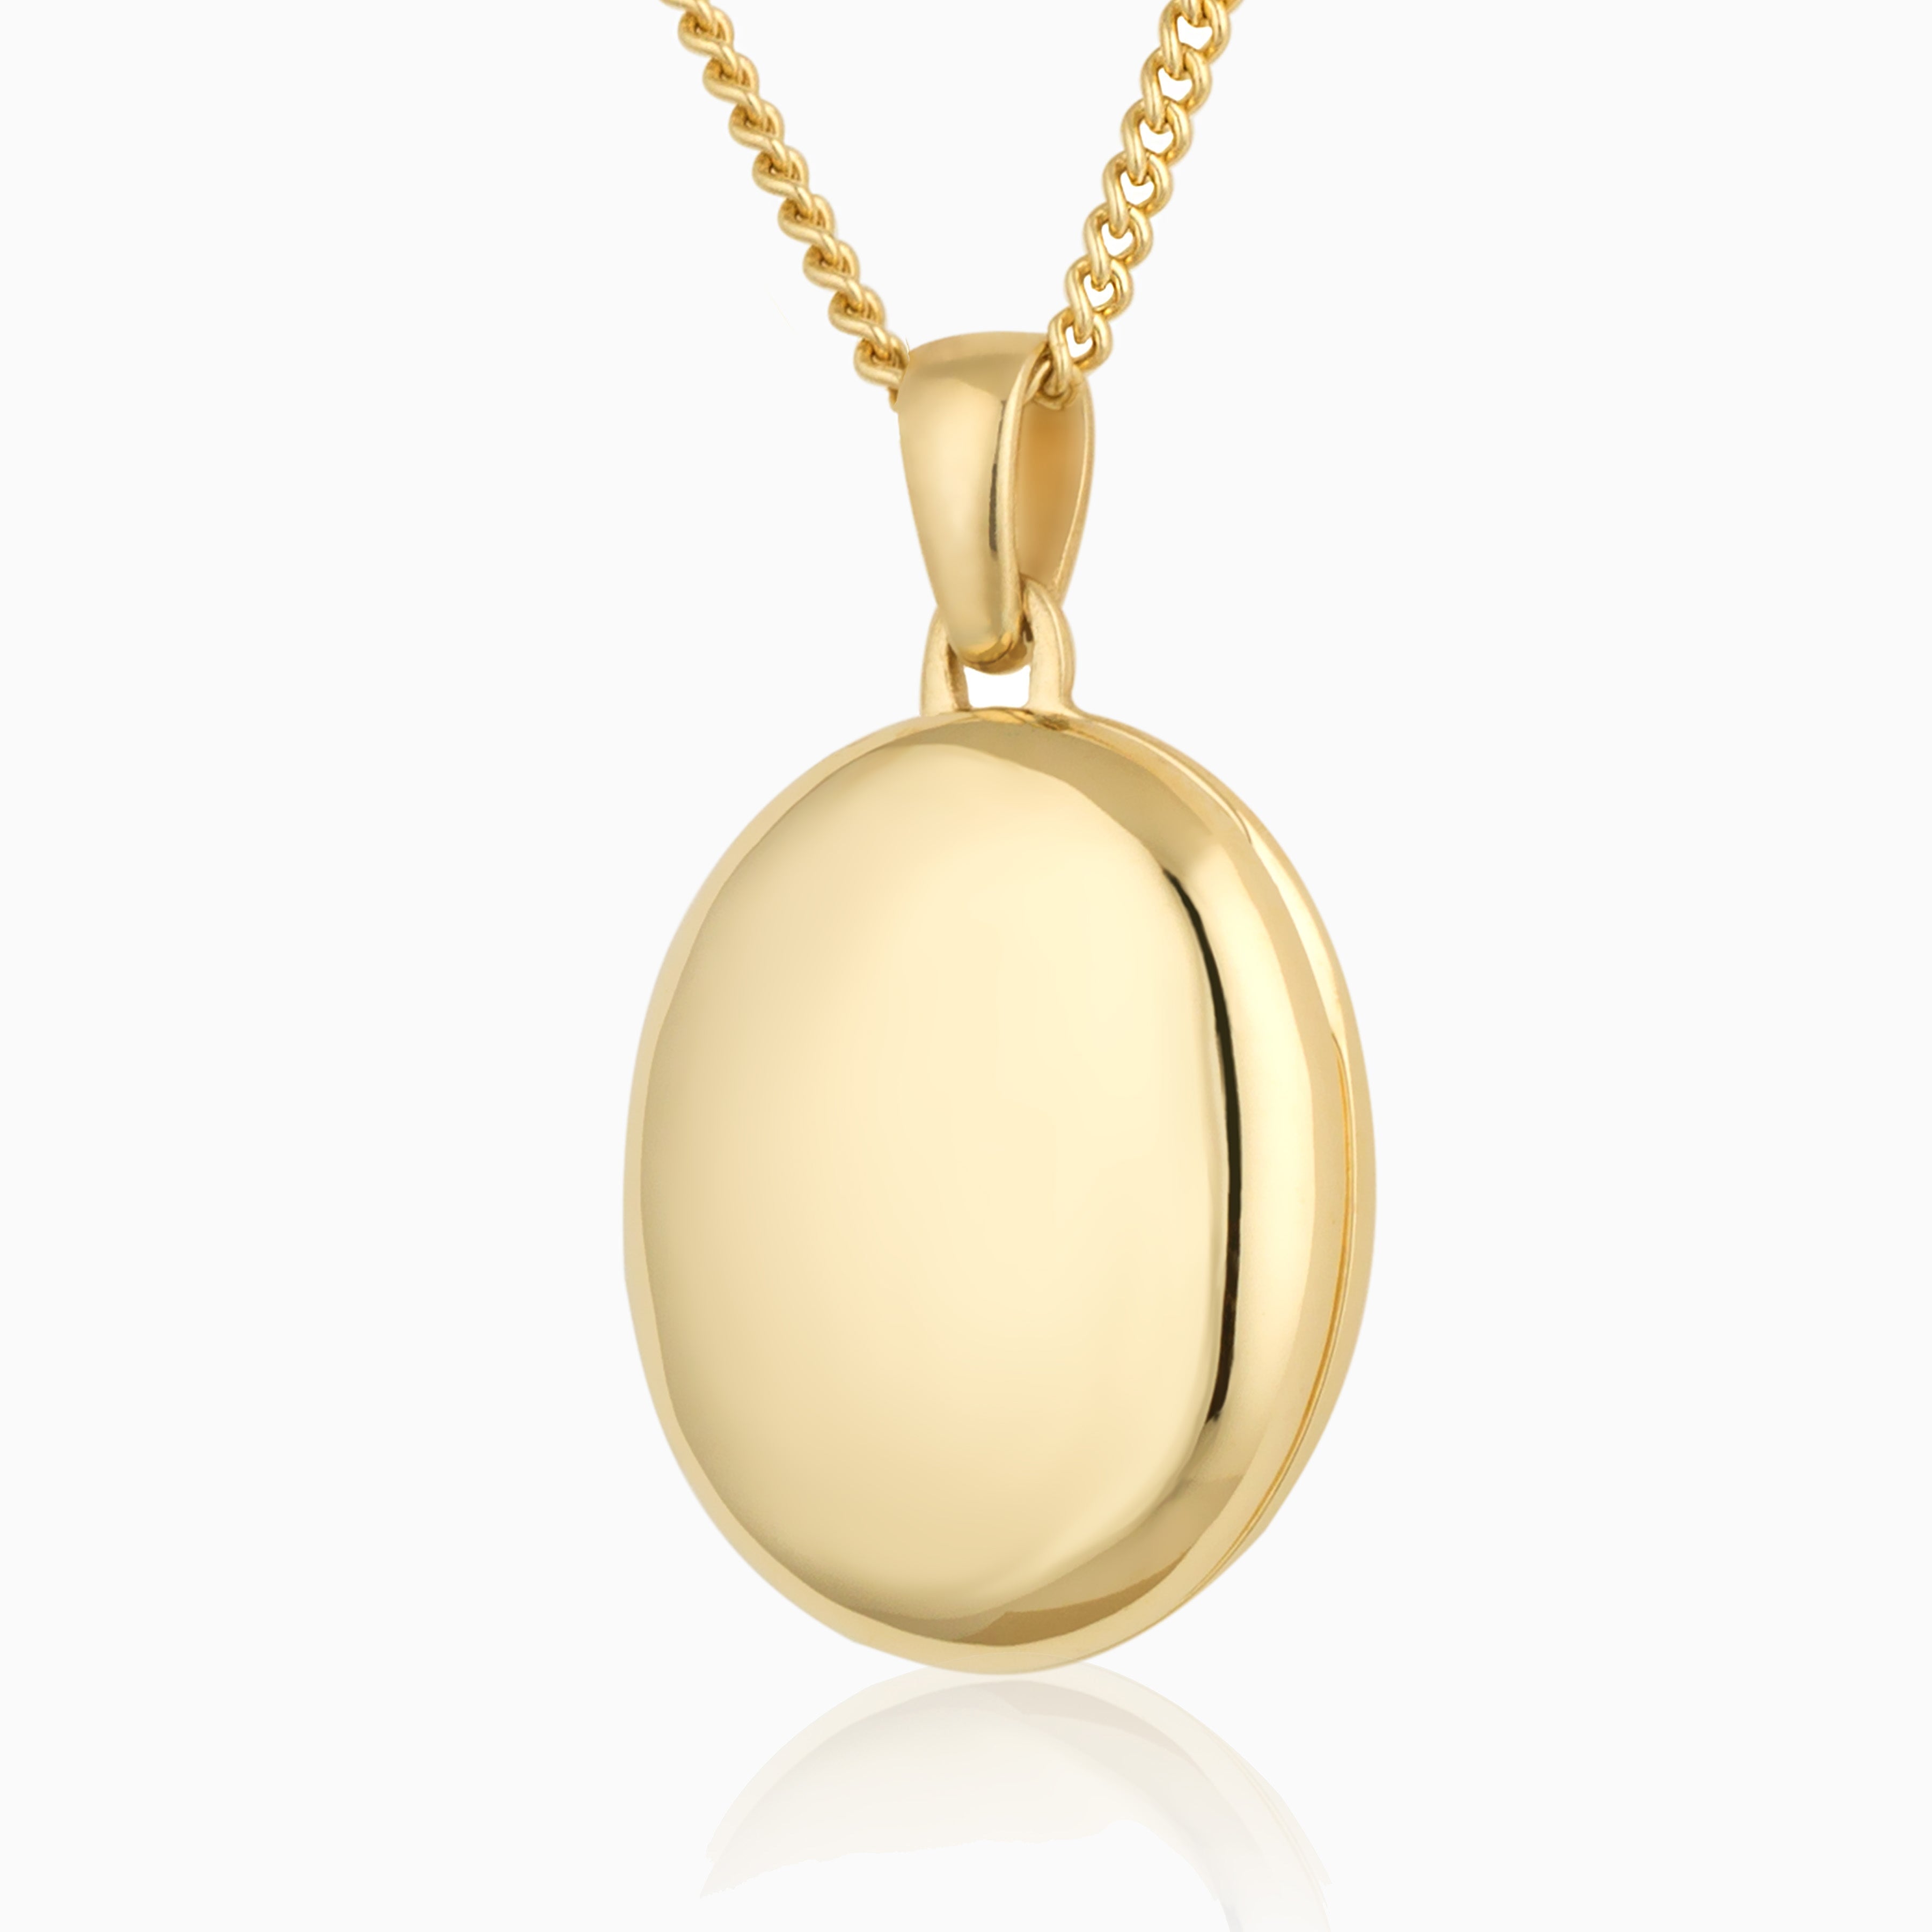 Product title: Hand Polished Gold Oval, product type: Locket